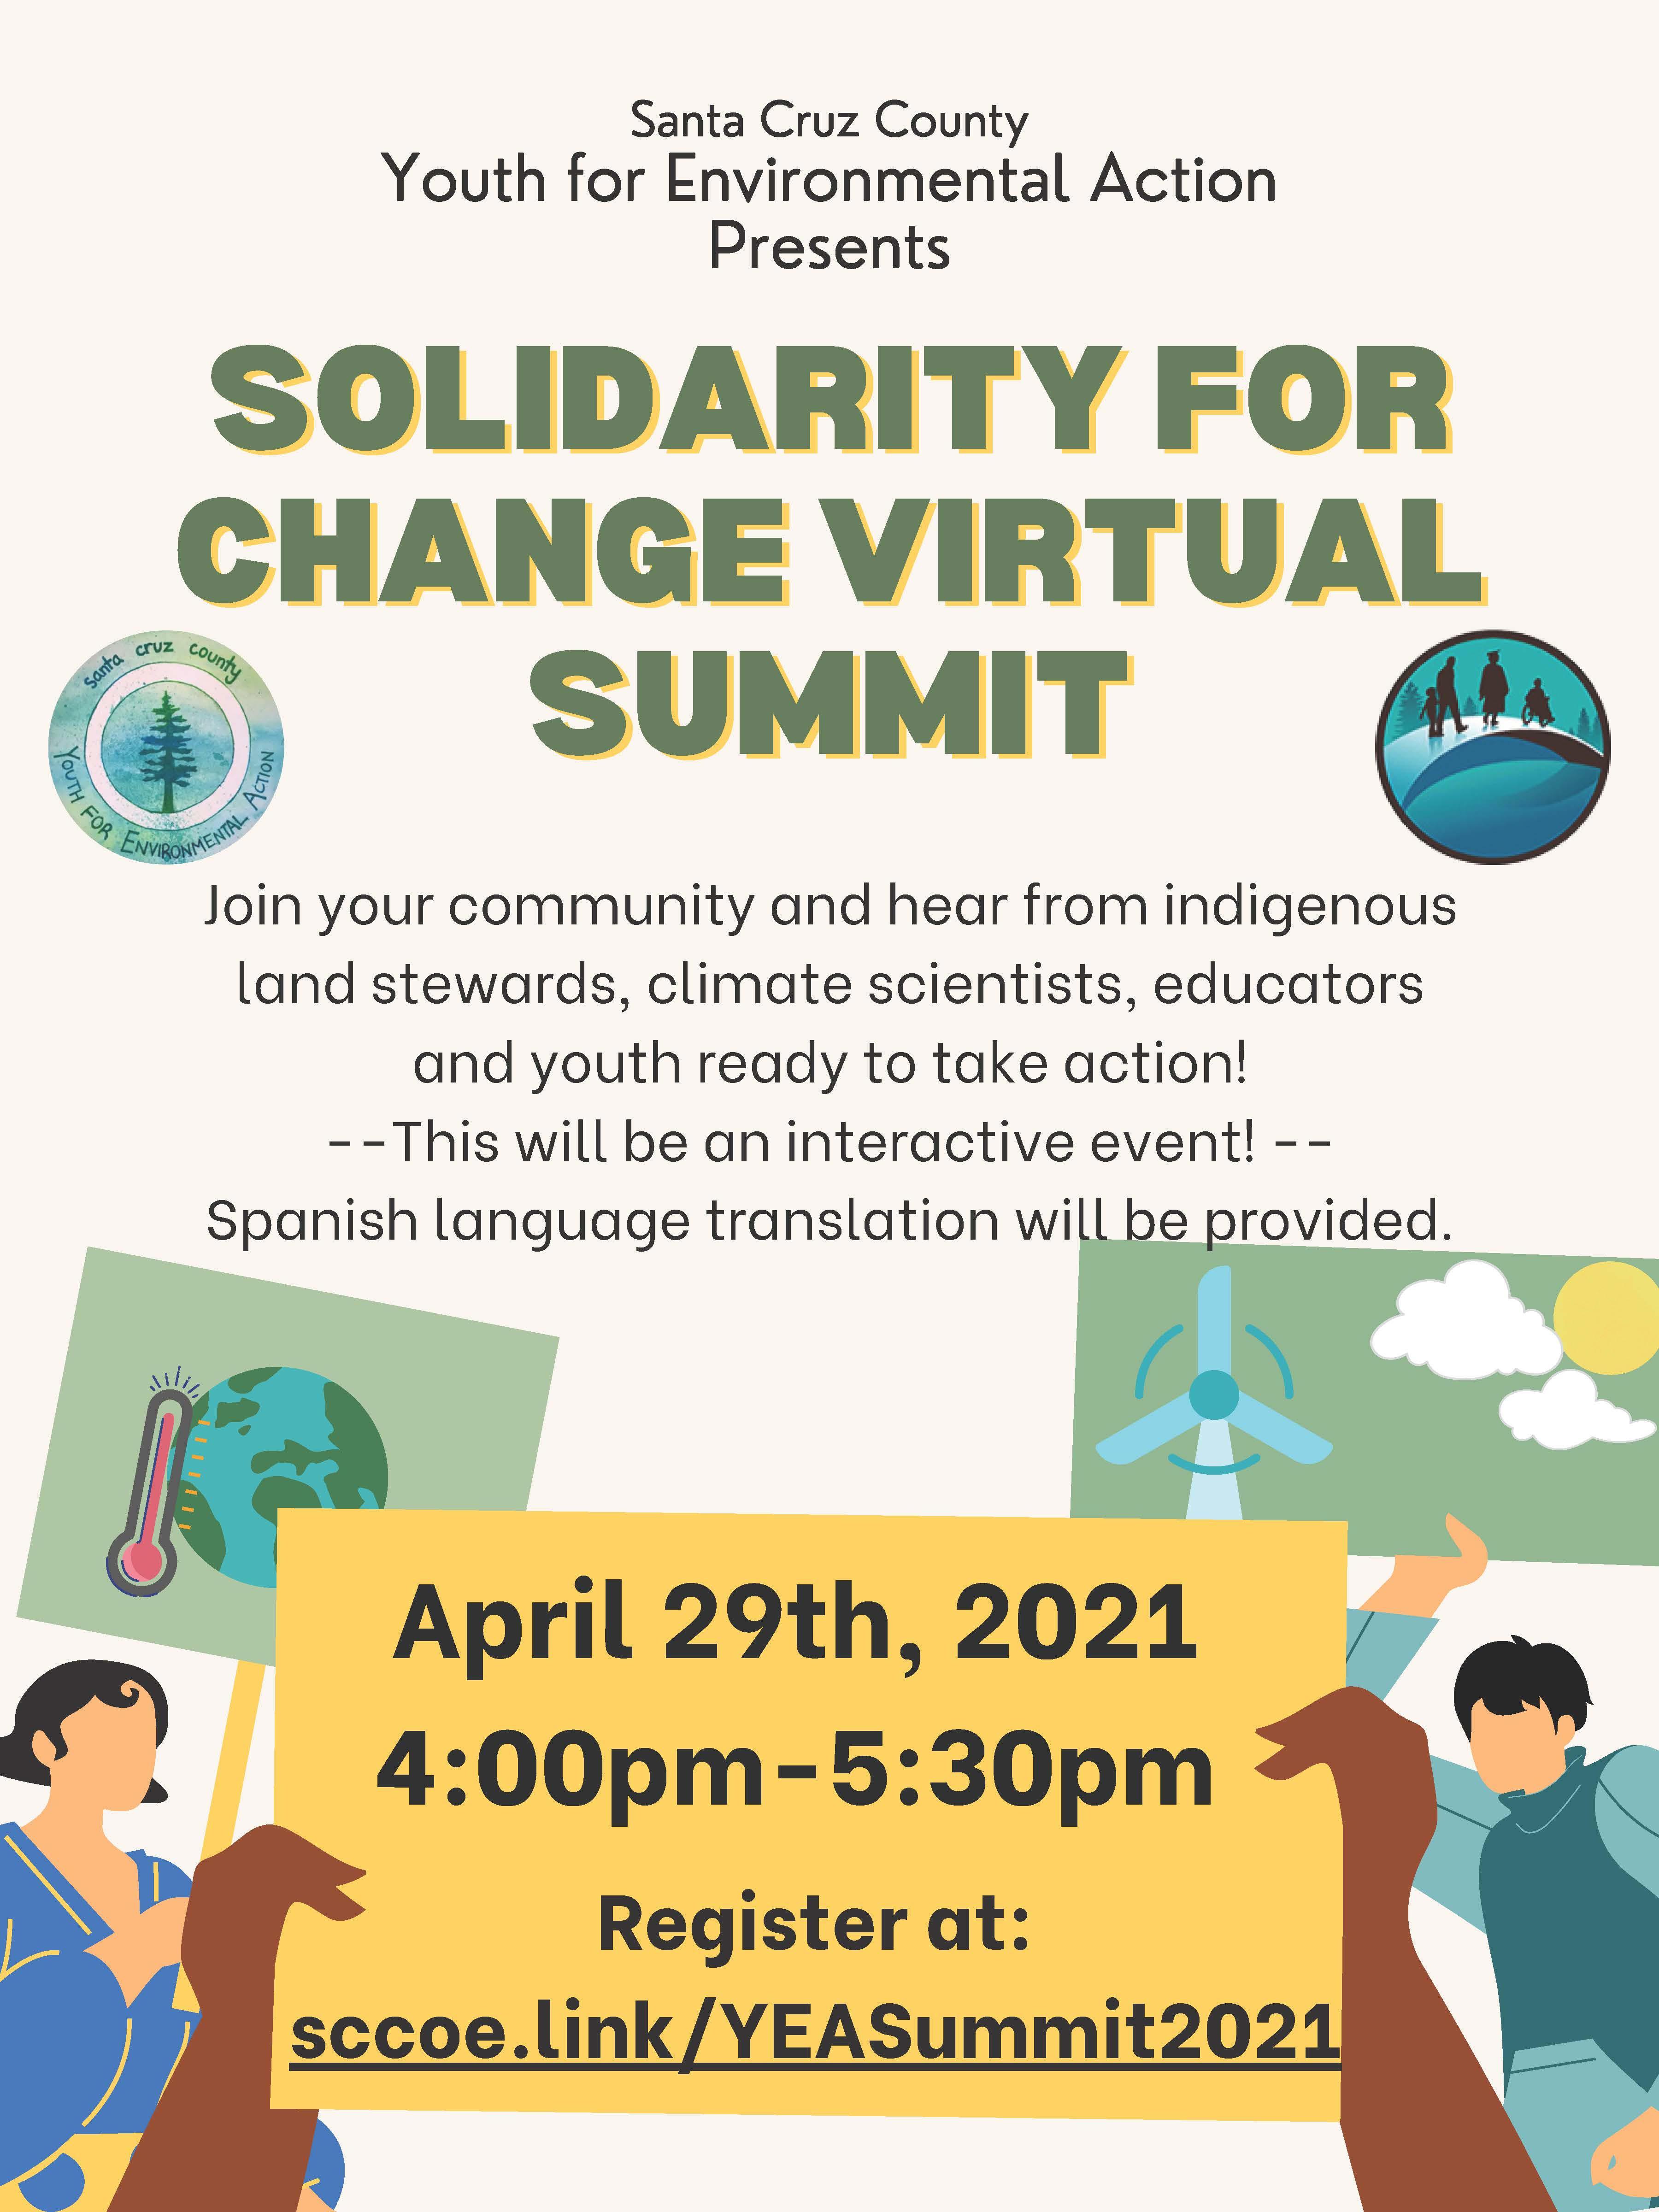 solidarity for change virtual summit; register at sccoe.link/YEASummit2021